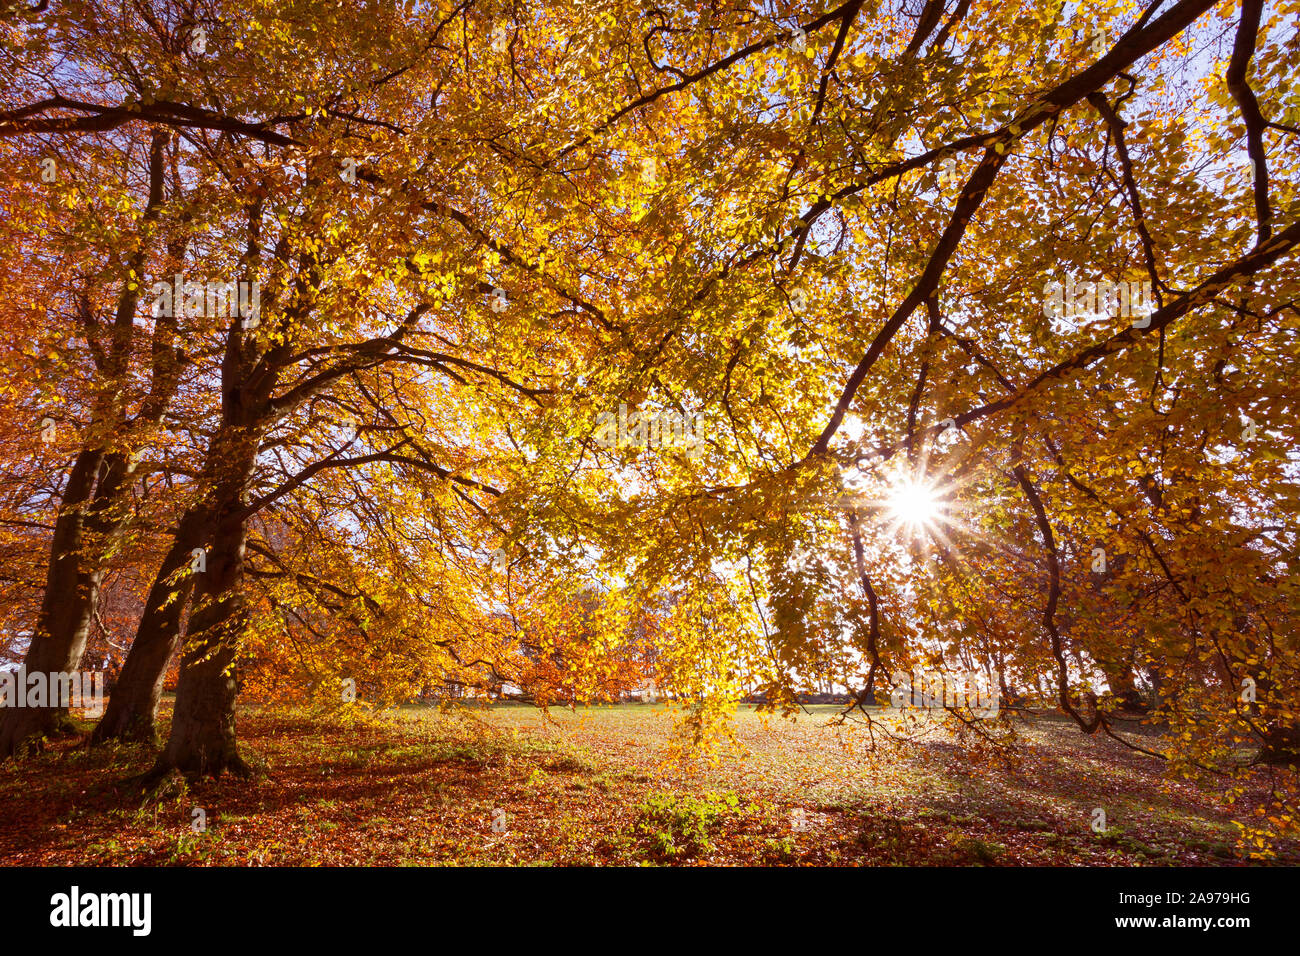 Barton-upon-Humber, North Lincolnshire, UK. 13th November 2019. UK Weather: Beech trees in Baysgarth Park on a sunny Autumn morning in November. Credit: LEE BEEL/Alamy Live News. Stock Photo